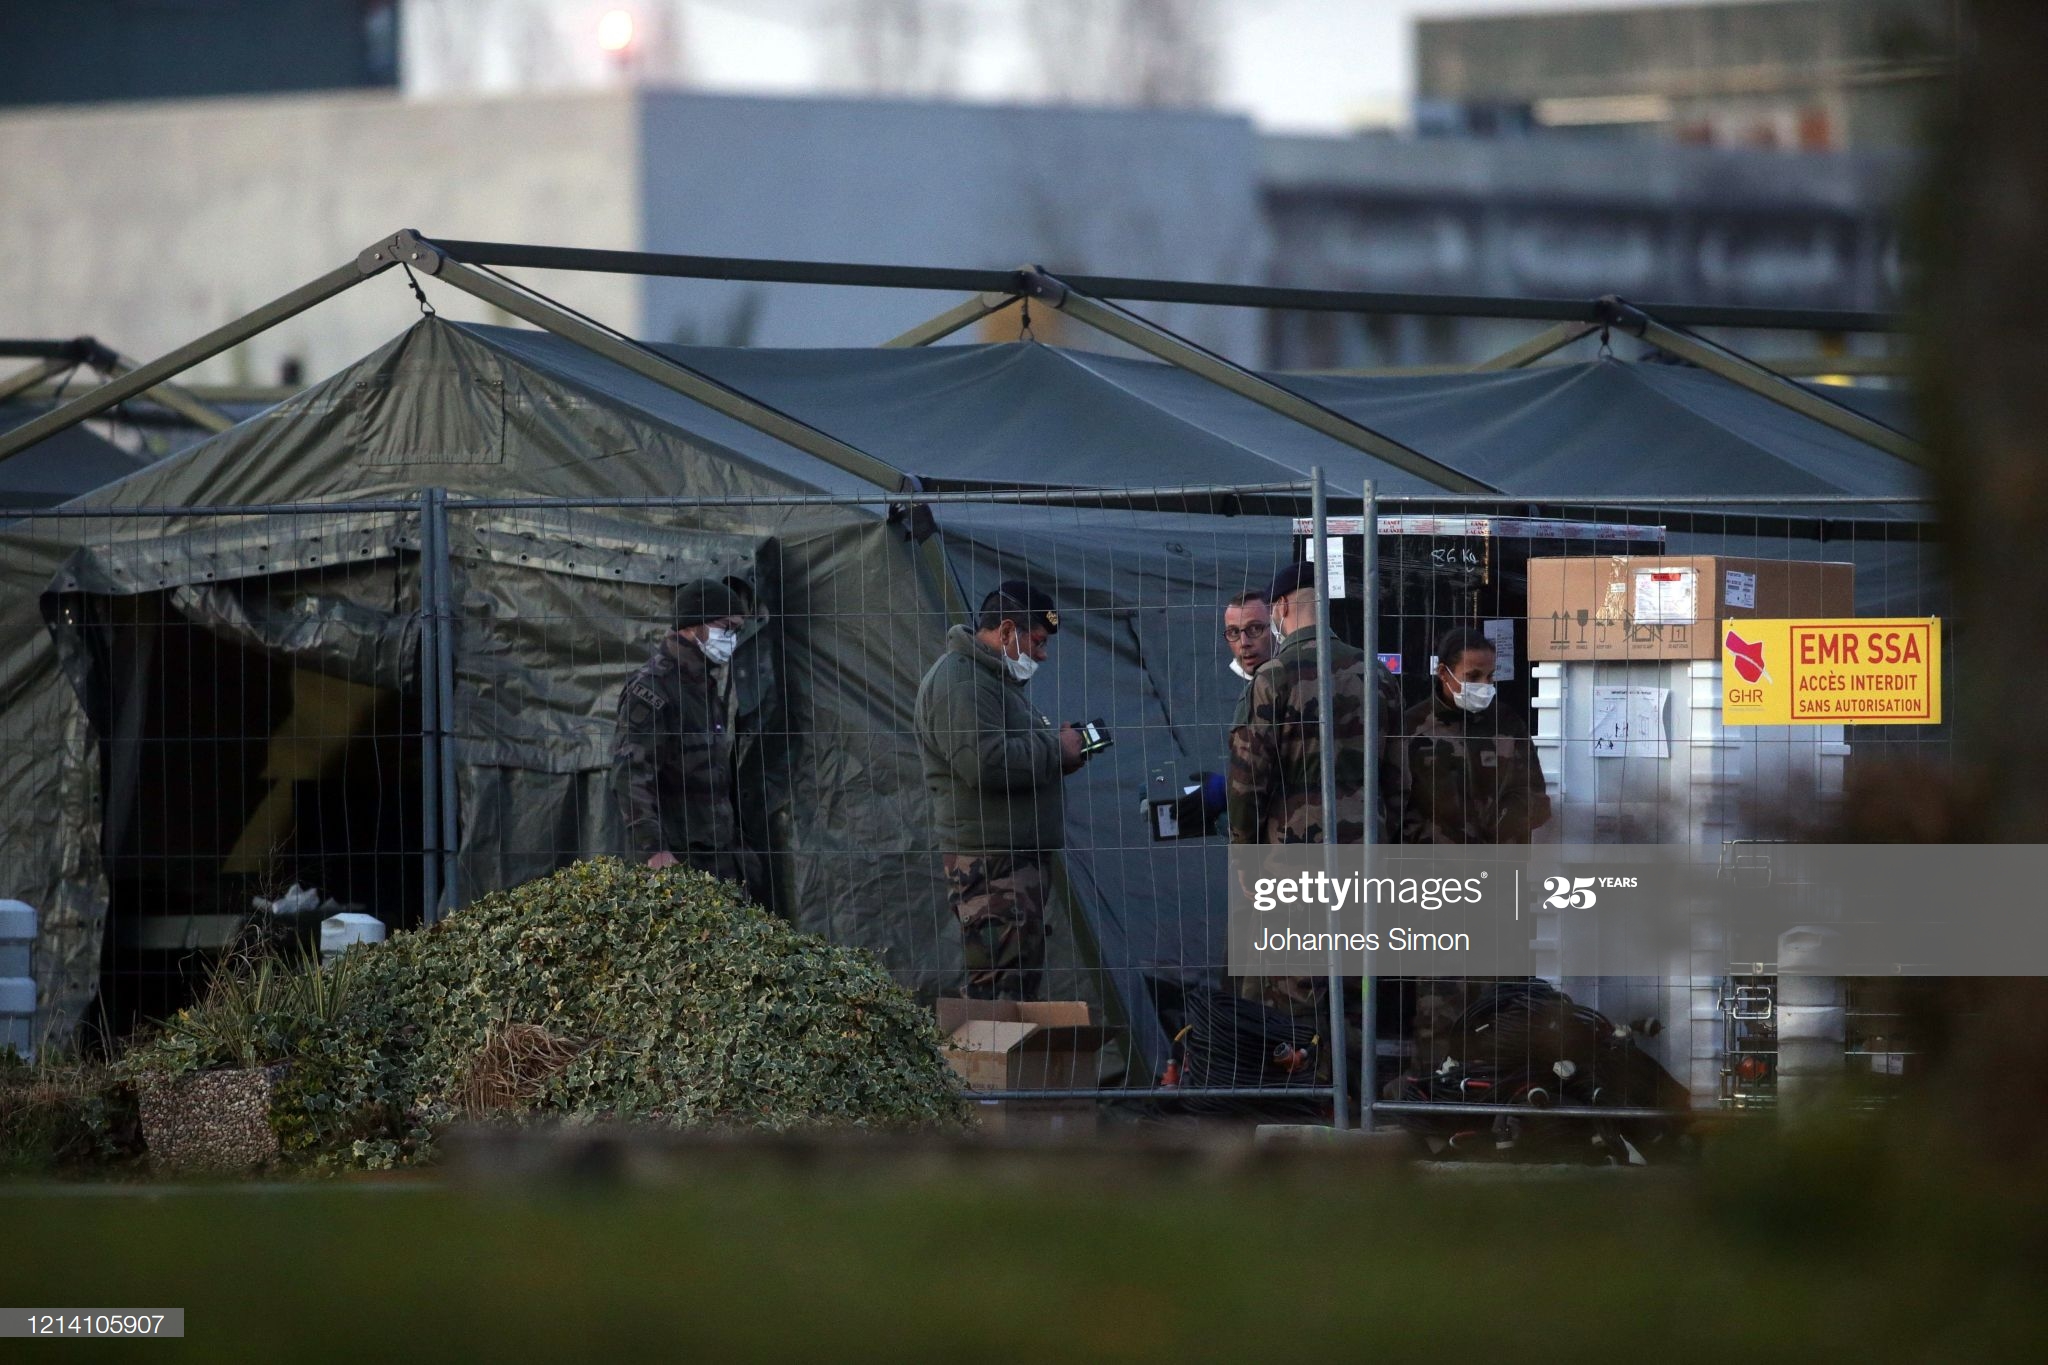 french-soldiers-wearing-protective-masks-set-up-tents-as-part-of-a-picture-id1214105907